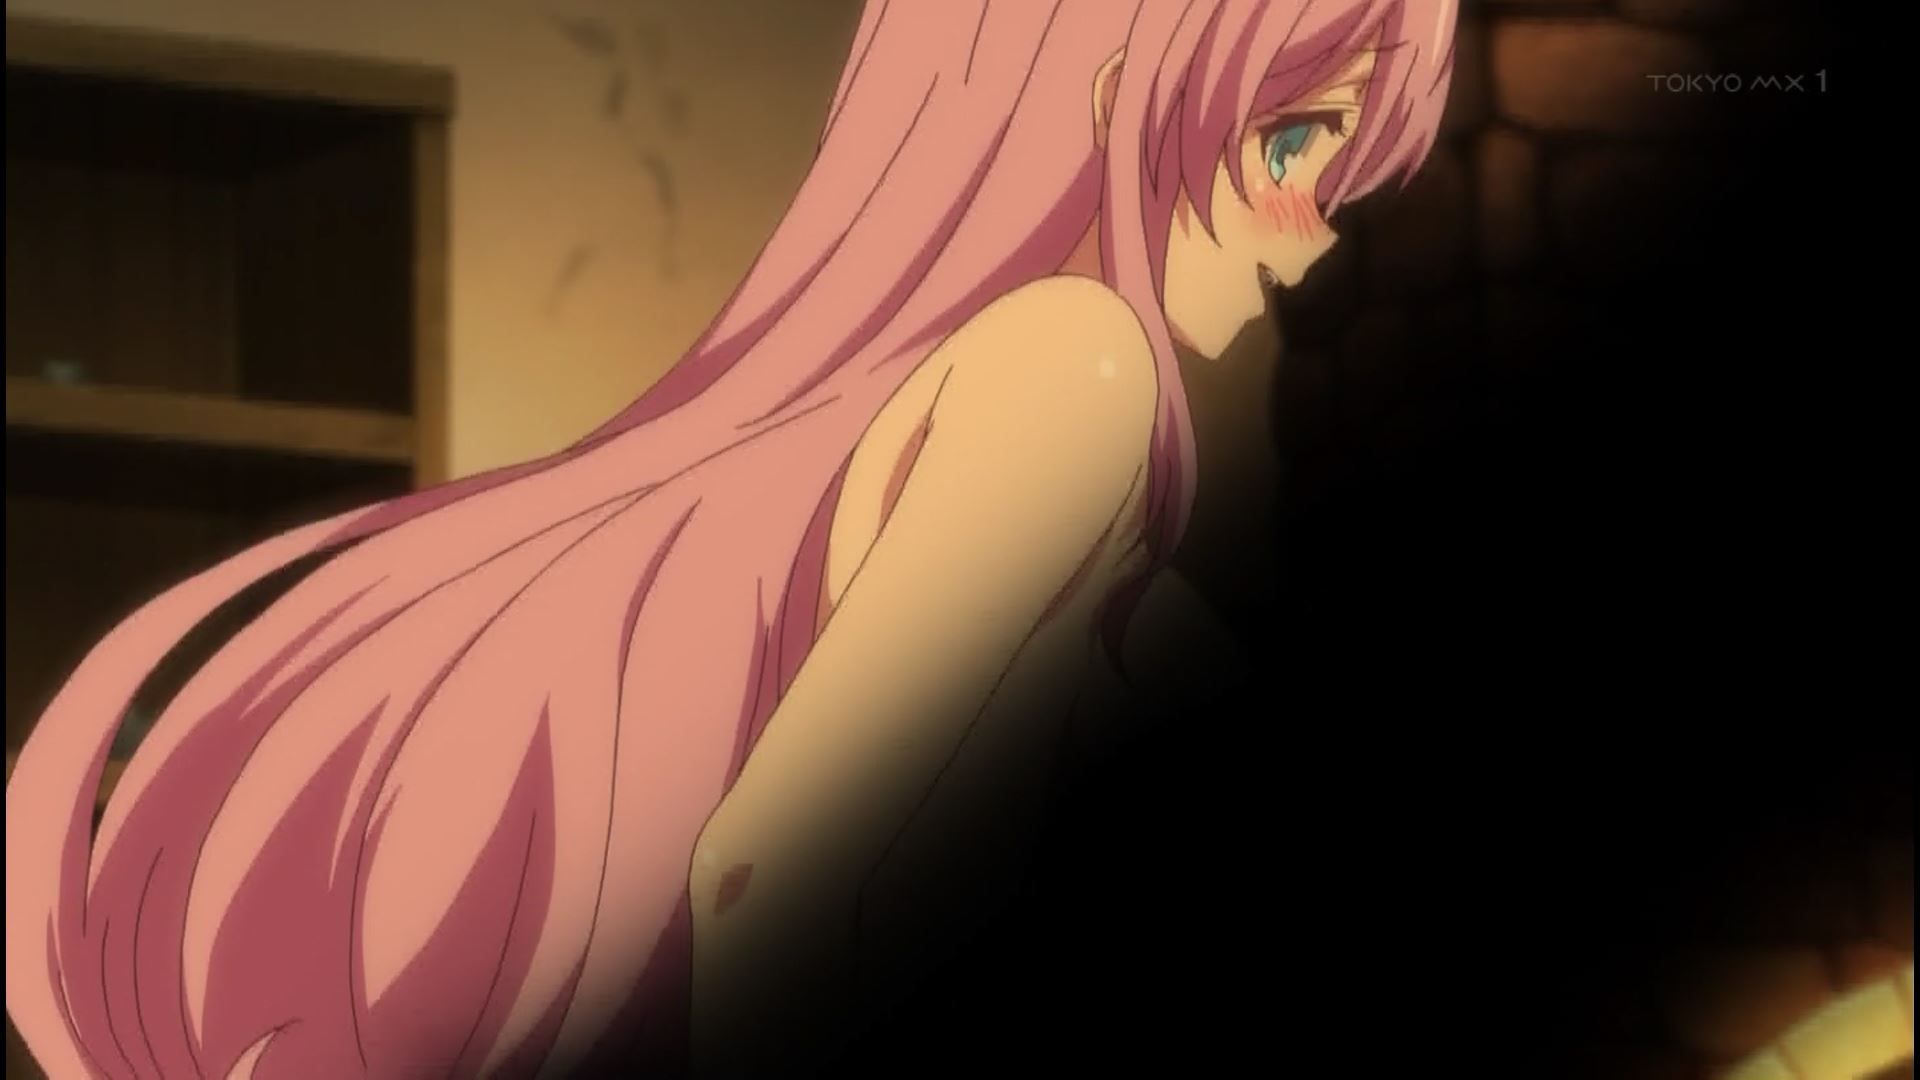 The scene where she masturbates in front of a girl in the anime "Recovery Technician's Redo" 9 stories 7